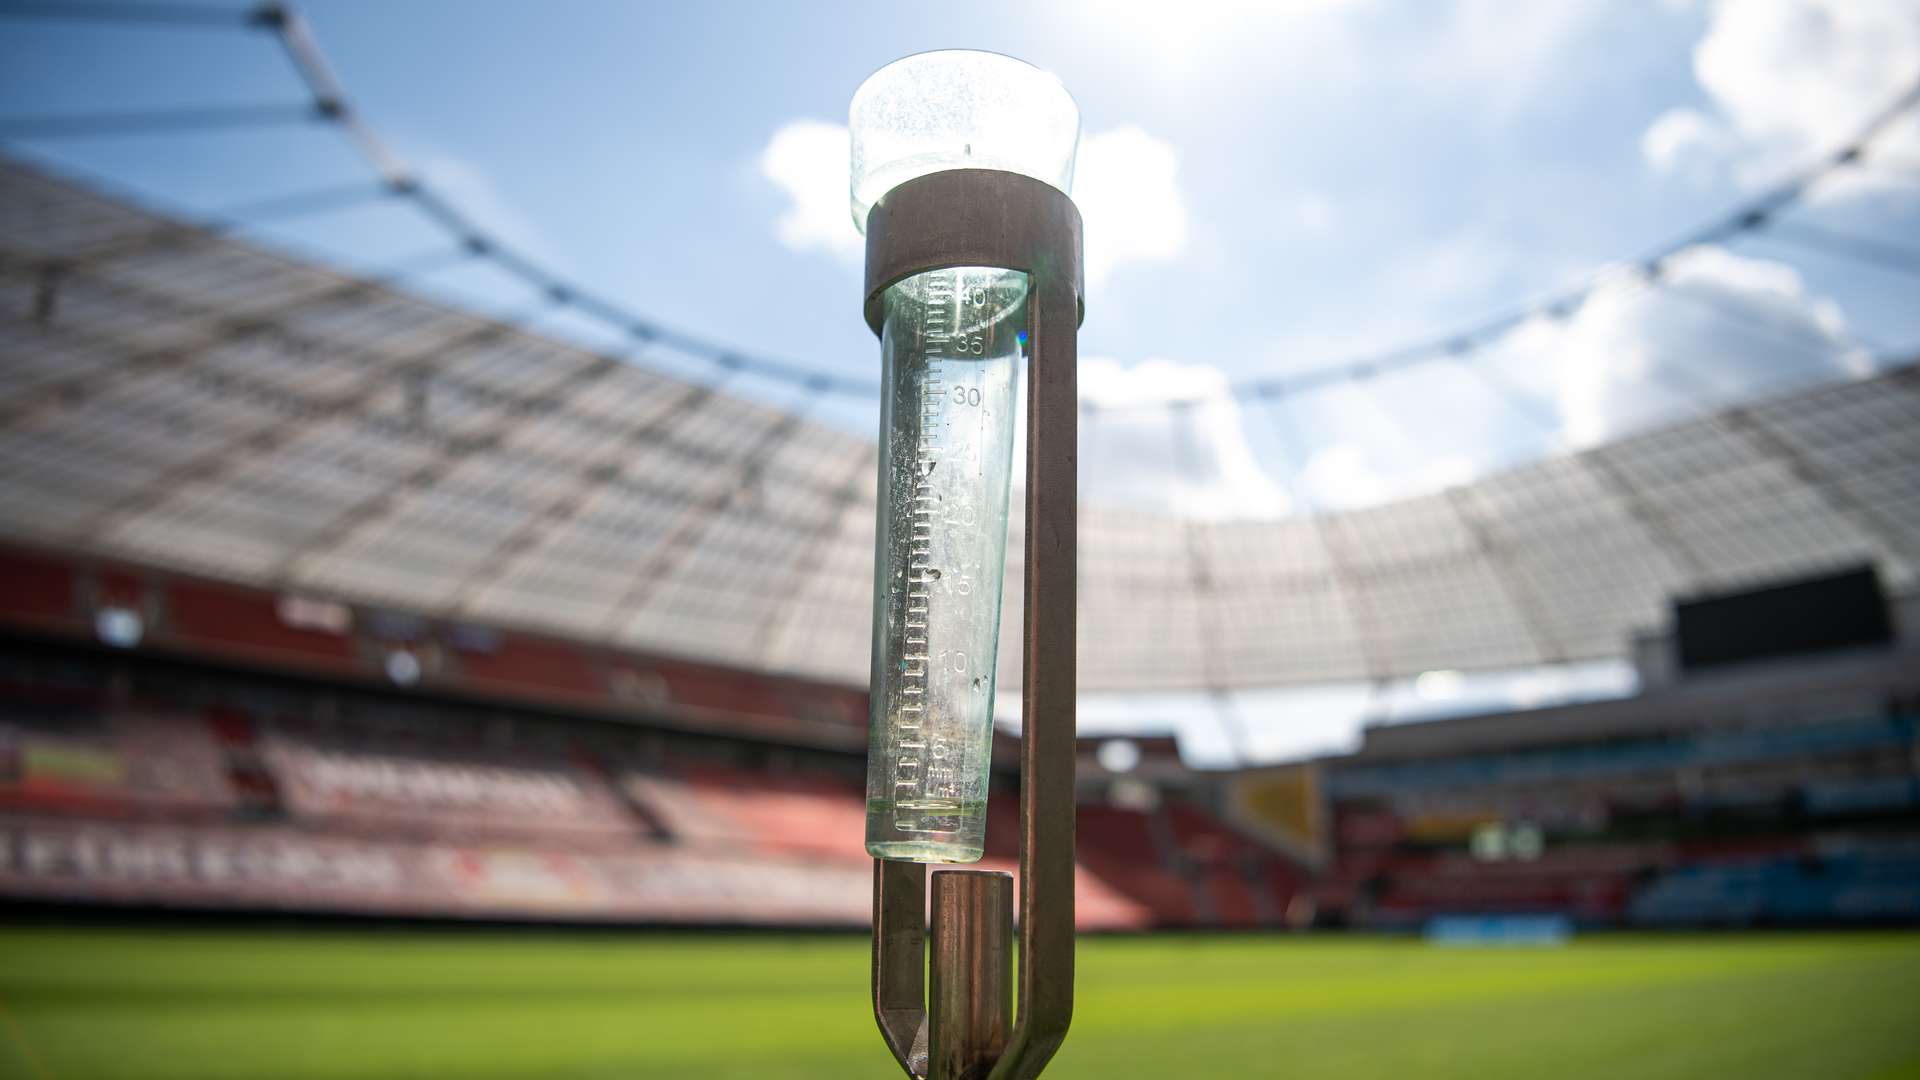 Weather measuring station of the pitch